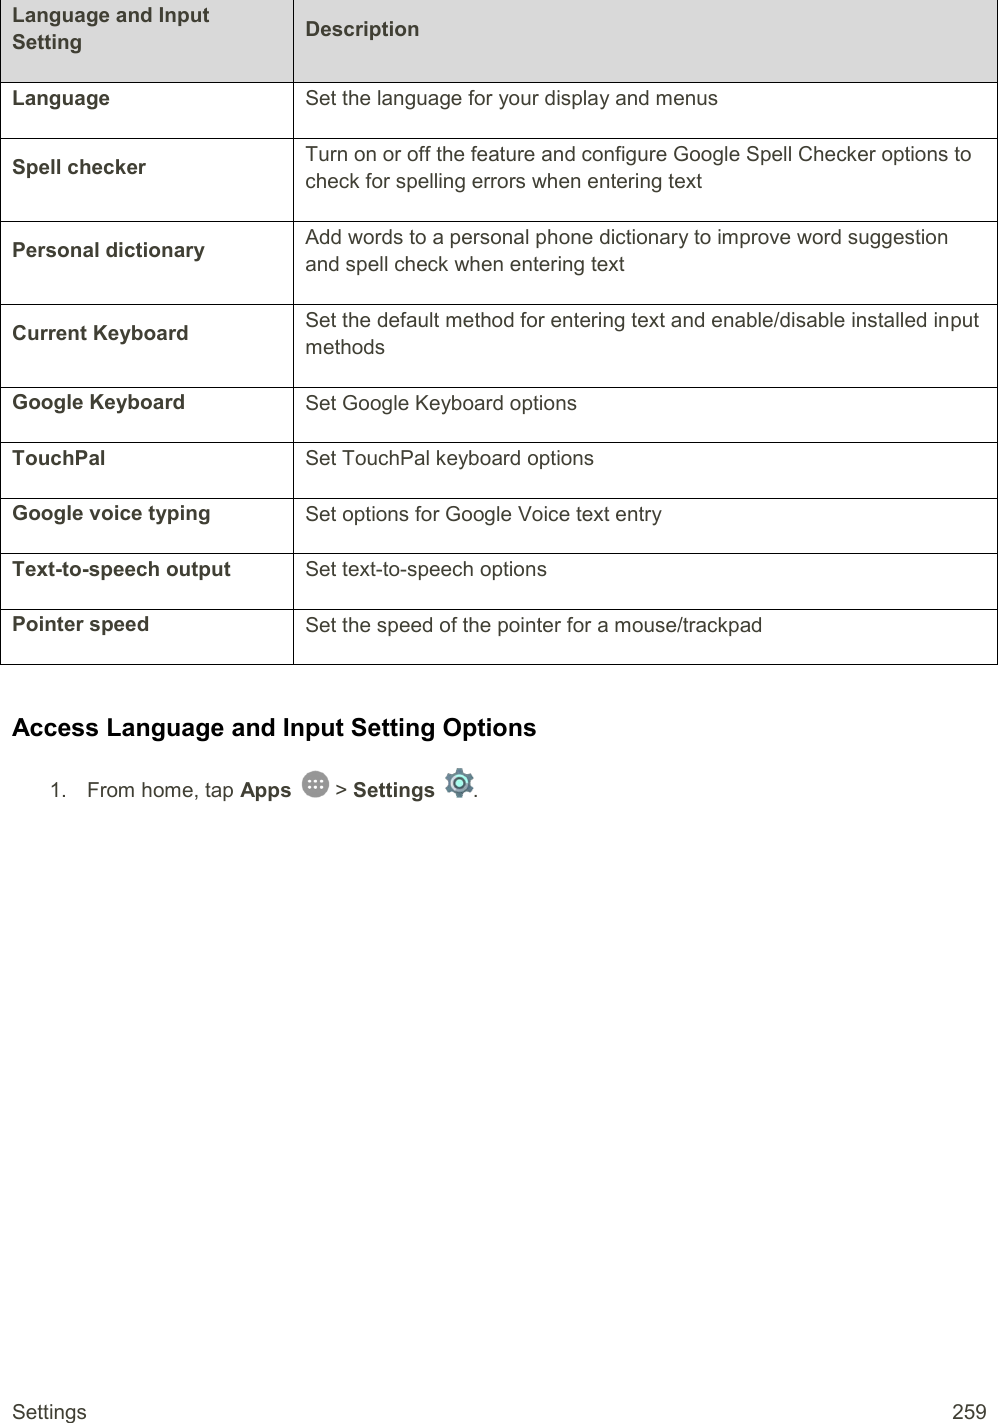 Settings  259 Language and Input Setting Description Language Set the language for your display and menus Spell checker Turn on or off the feature and configure Google Spell Checker options to check for spelling errors when entering text Personal dictionary Add words to a personal phone dictionary to improve word suggestion and spell check when entering text Current Keyboard Set the default method for entering text and enable/disable installed input methods Google Keyboard Set Google Keyboard options TouchPal Set TouchPal keyboard options Google voice typing Set options for Google Voice text entry Text-to-speech output Set text-to-speech options Pointer speed Set the speed of the pointer for a mouse/trackpad  Access Language and Input Setting Options 1.  From home, tap Apps   &gt; Settings  .  